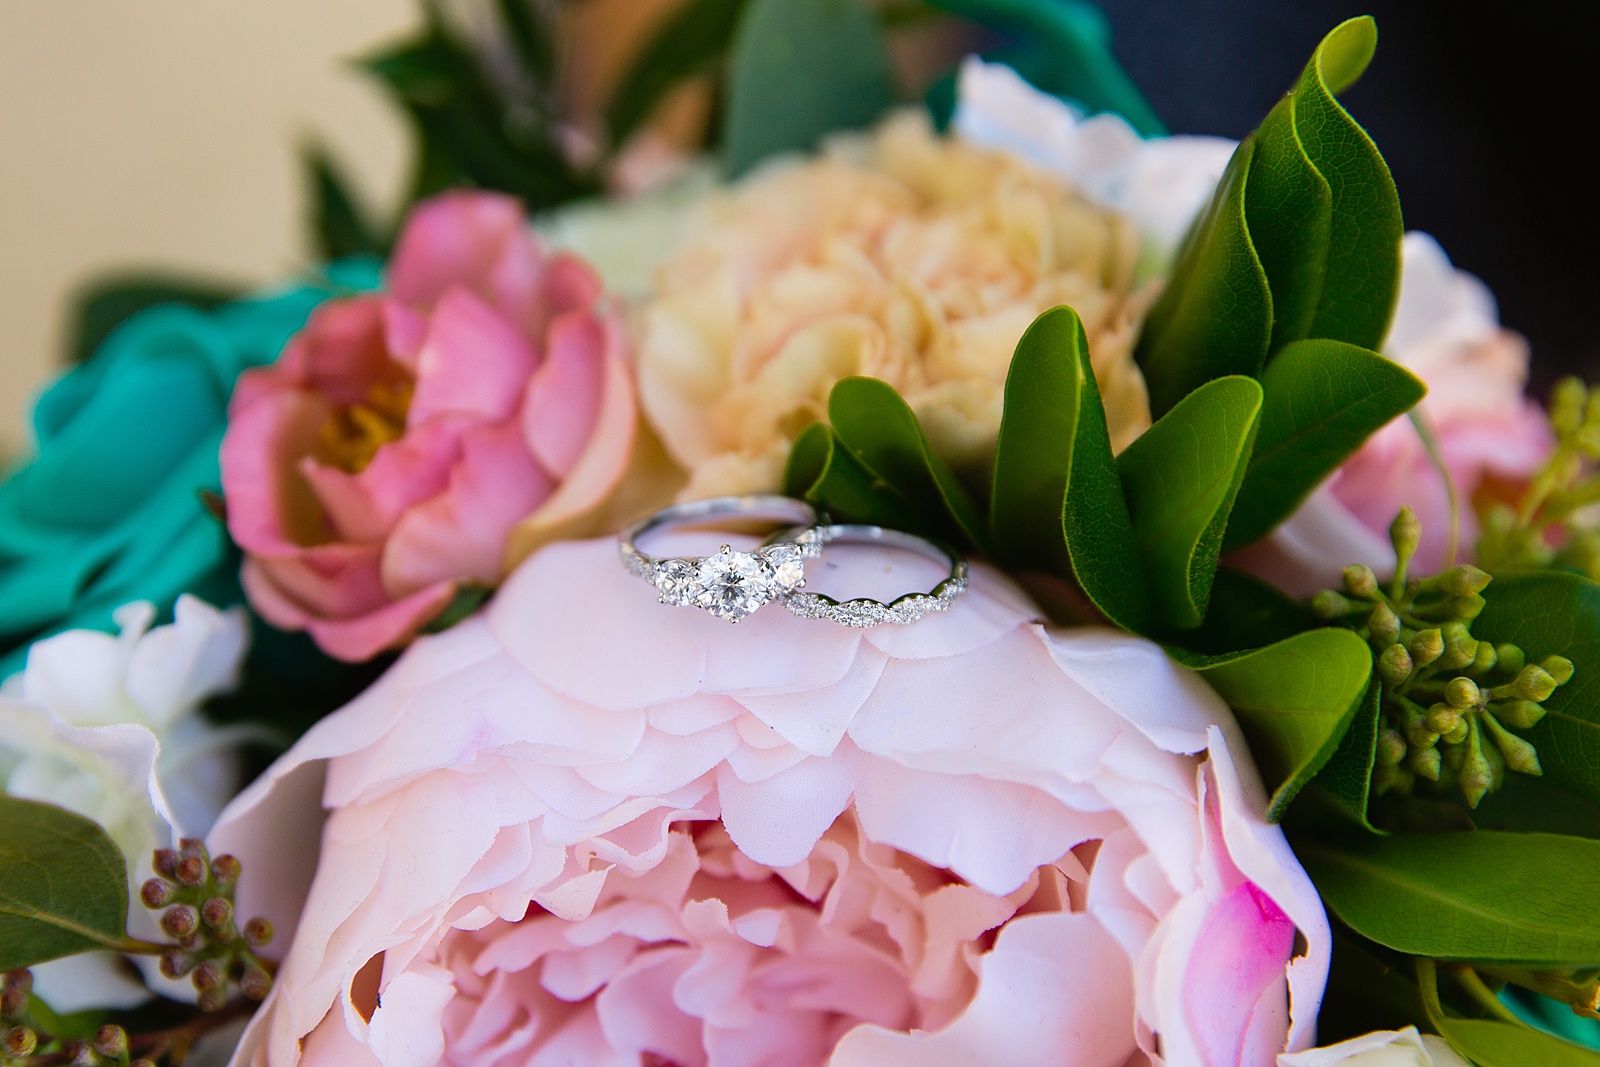 Bride's white gold and diamond wedding band and engagement ring set on top of a pink and teal wedding bouquet by Arizona wedding photographer PMA Photography.